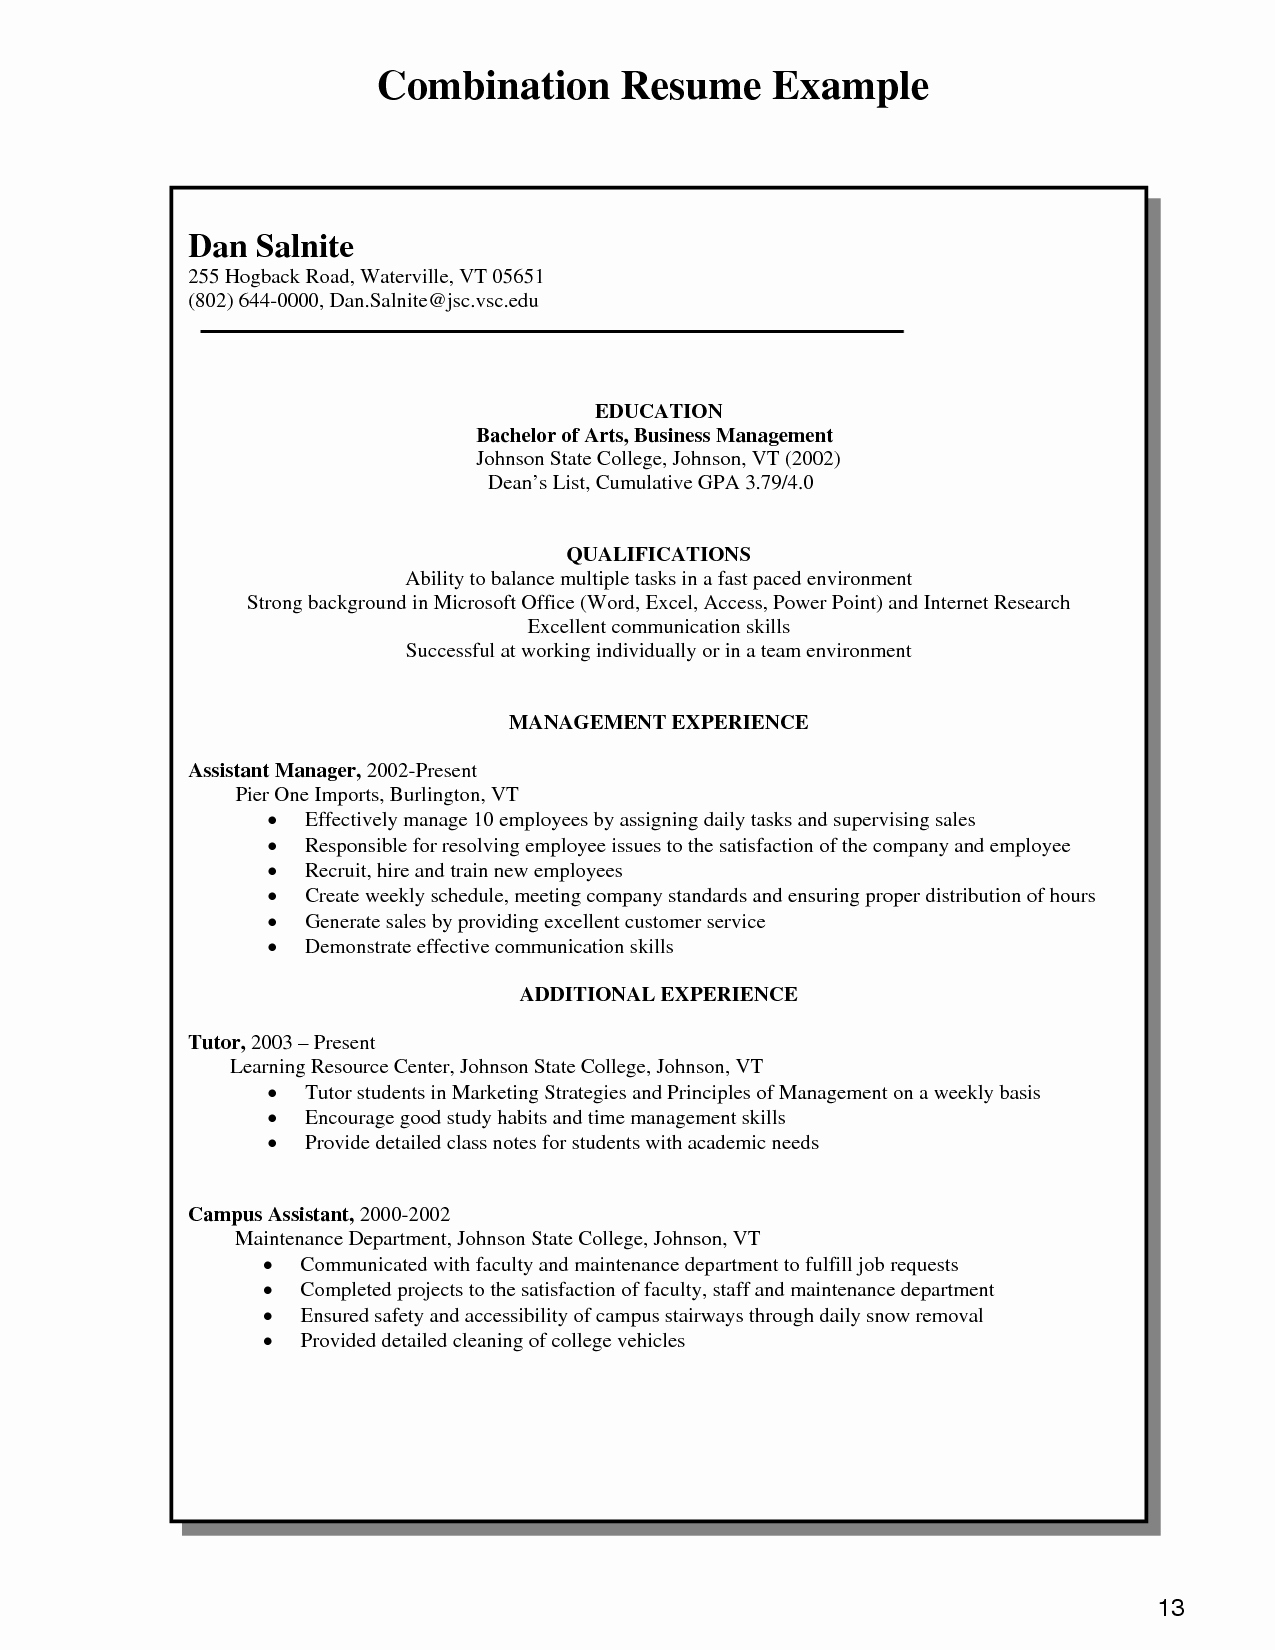 041 Combination Resume Template Free Awesome Bination Of For Combination Resume Template Word